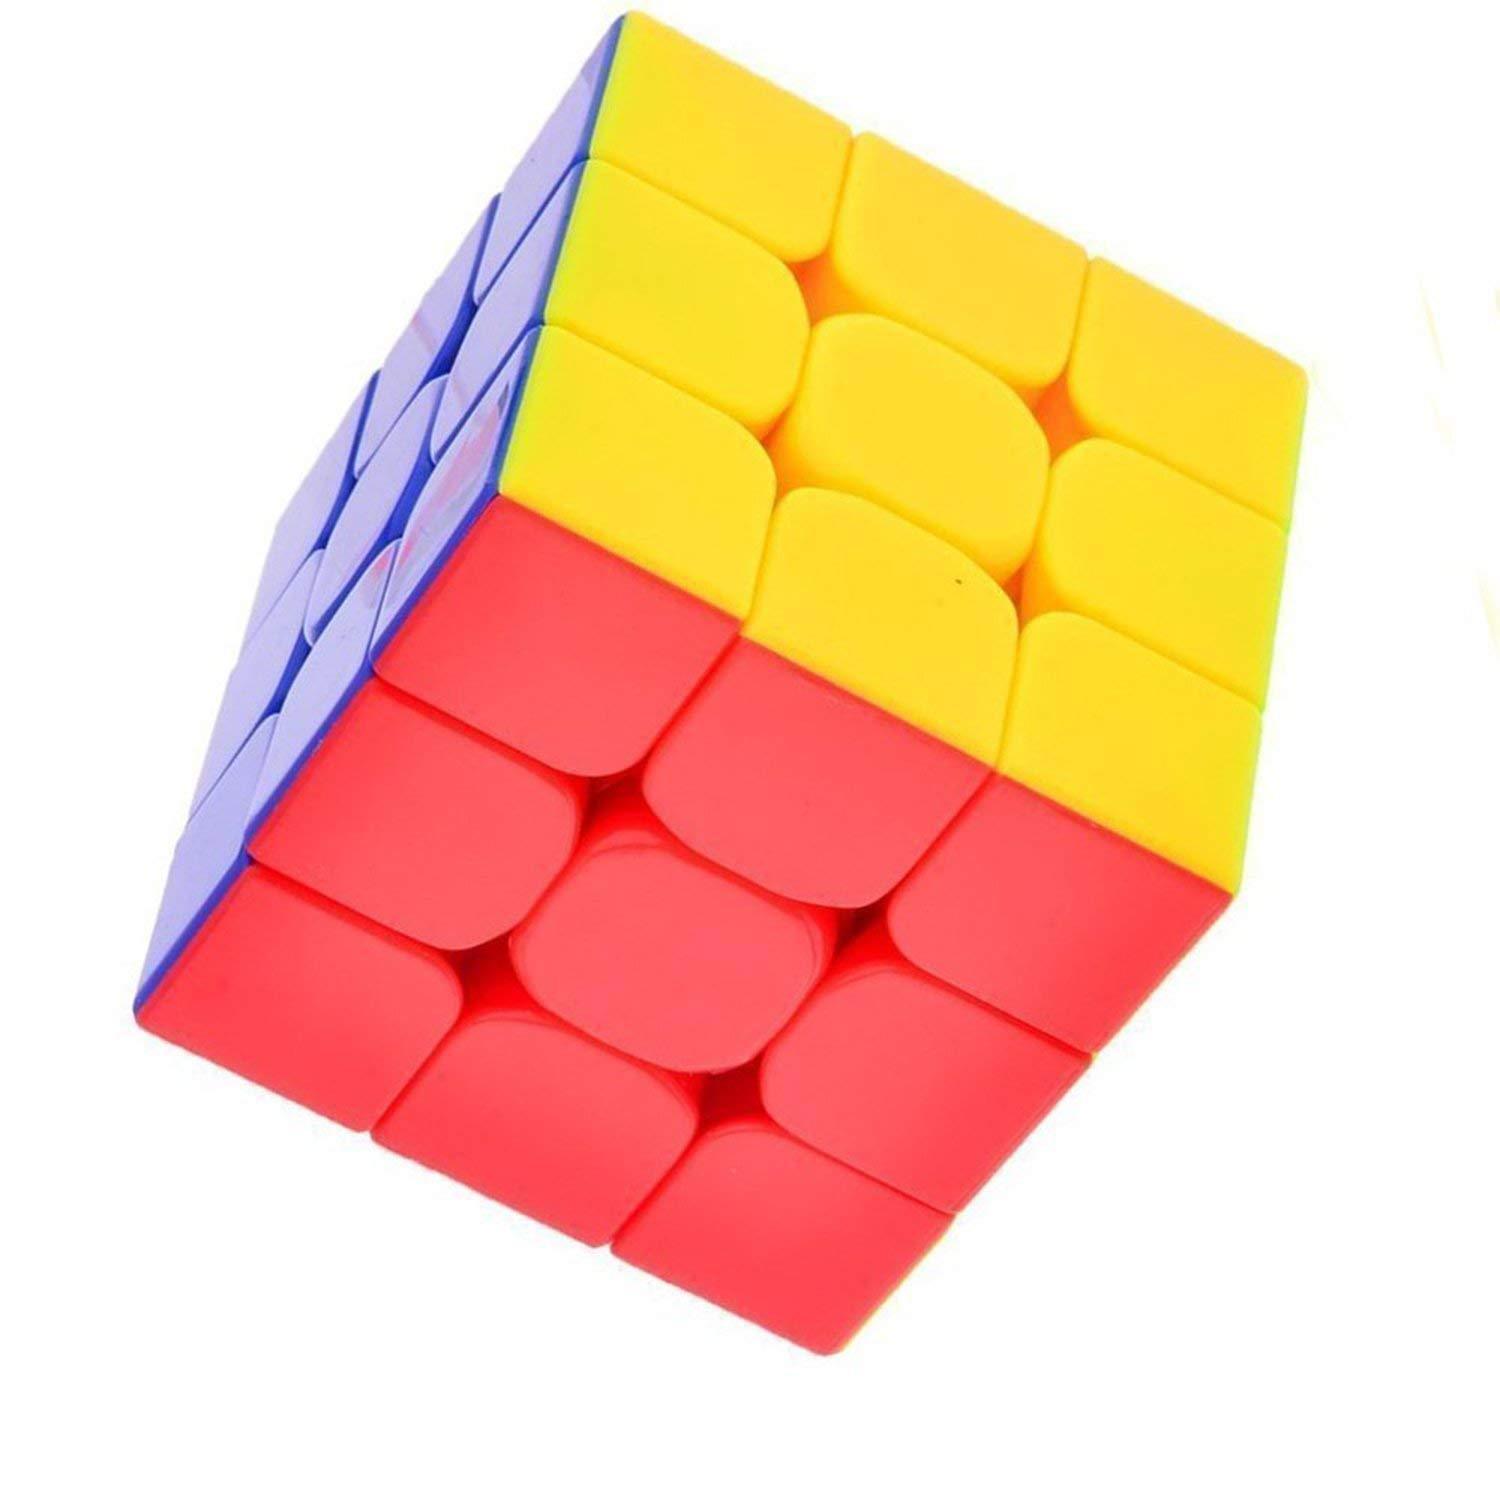 7604 High Speed Multicolor Cube - SkyShopy